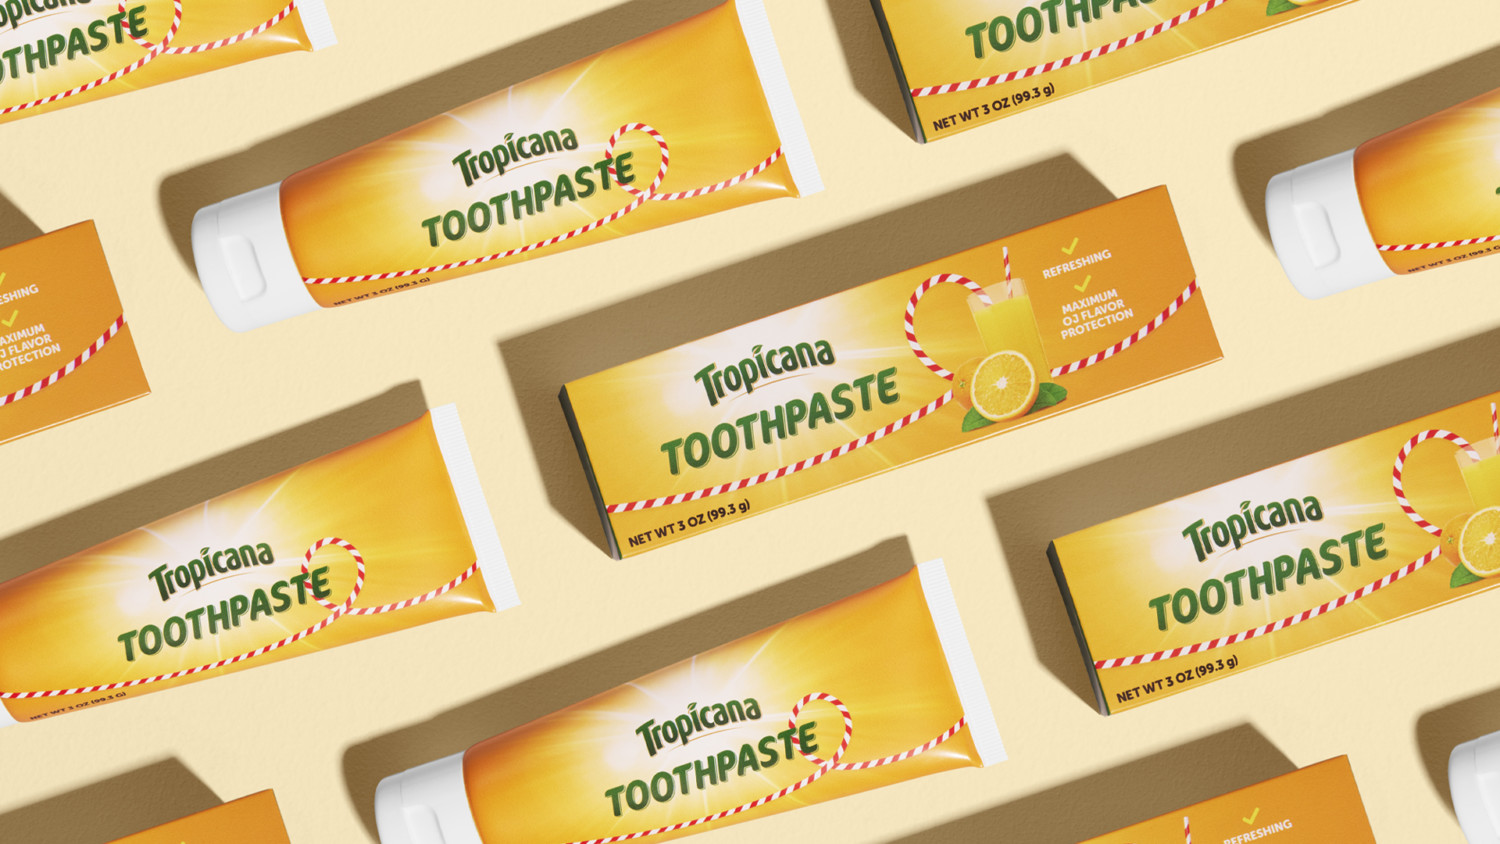 Tropicana toothpaste in yellow boxes